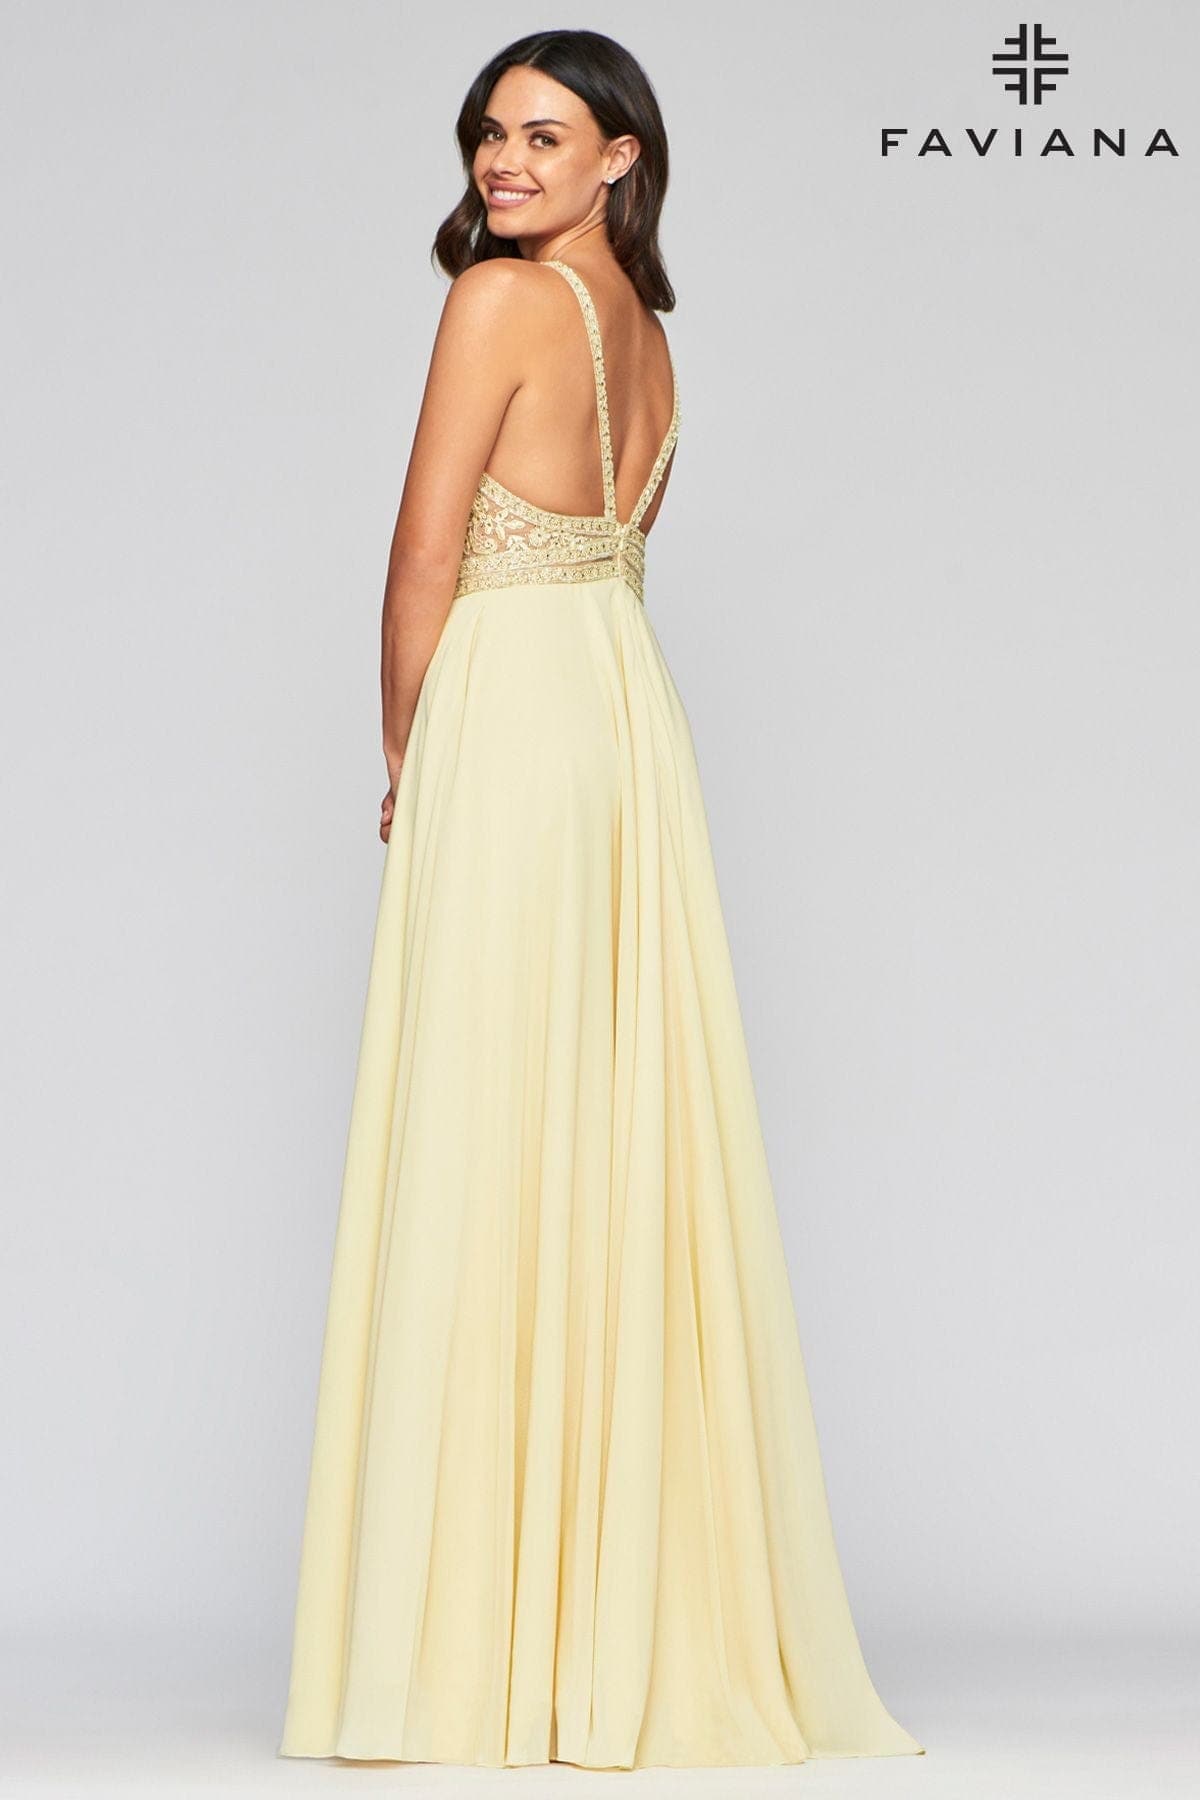 V Neckline Prom Dress With Chiffon Skirt And Mesh Paneling